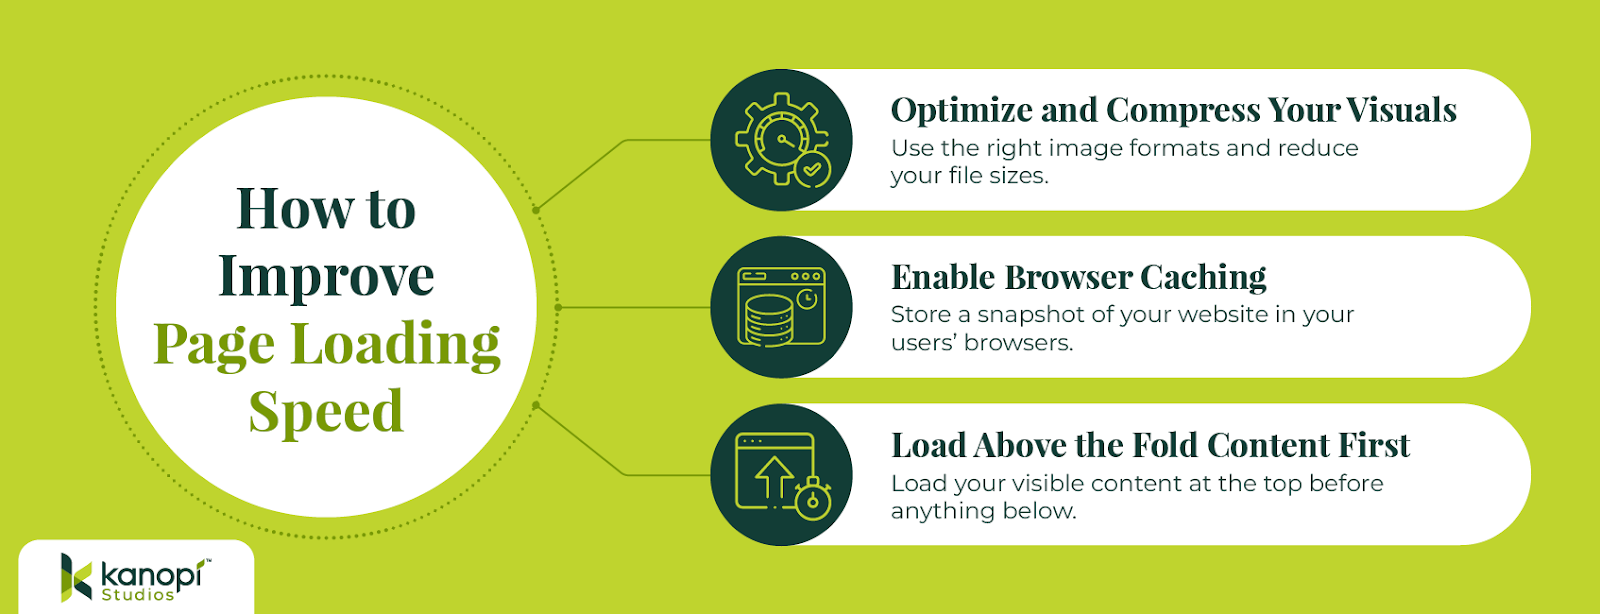 Suggested Alt Text: A fast page loading speed will help improve your nonprofit website’s mobile-responsiveness. This chart maps out the top three ways to make your website load faster. 